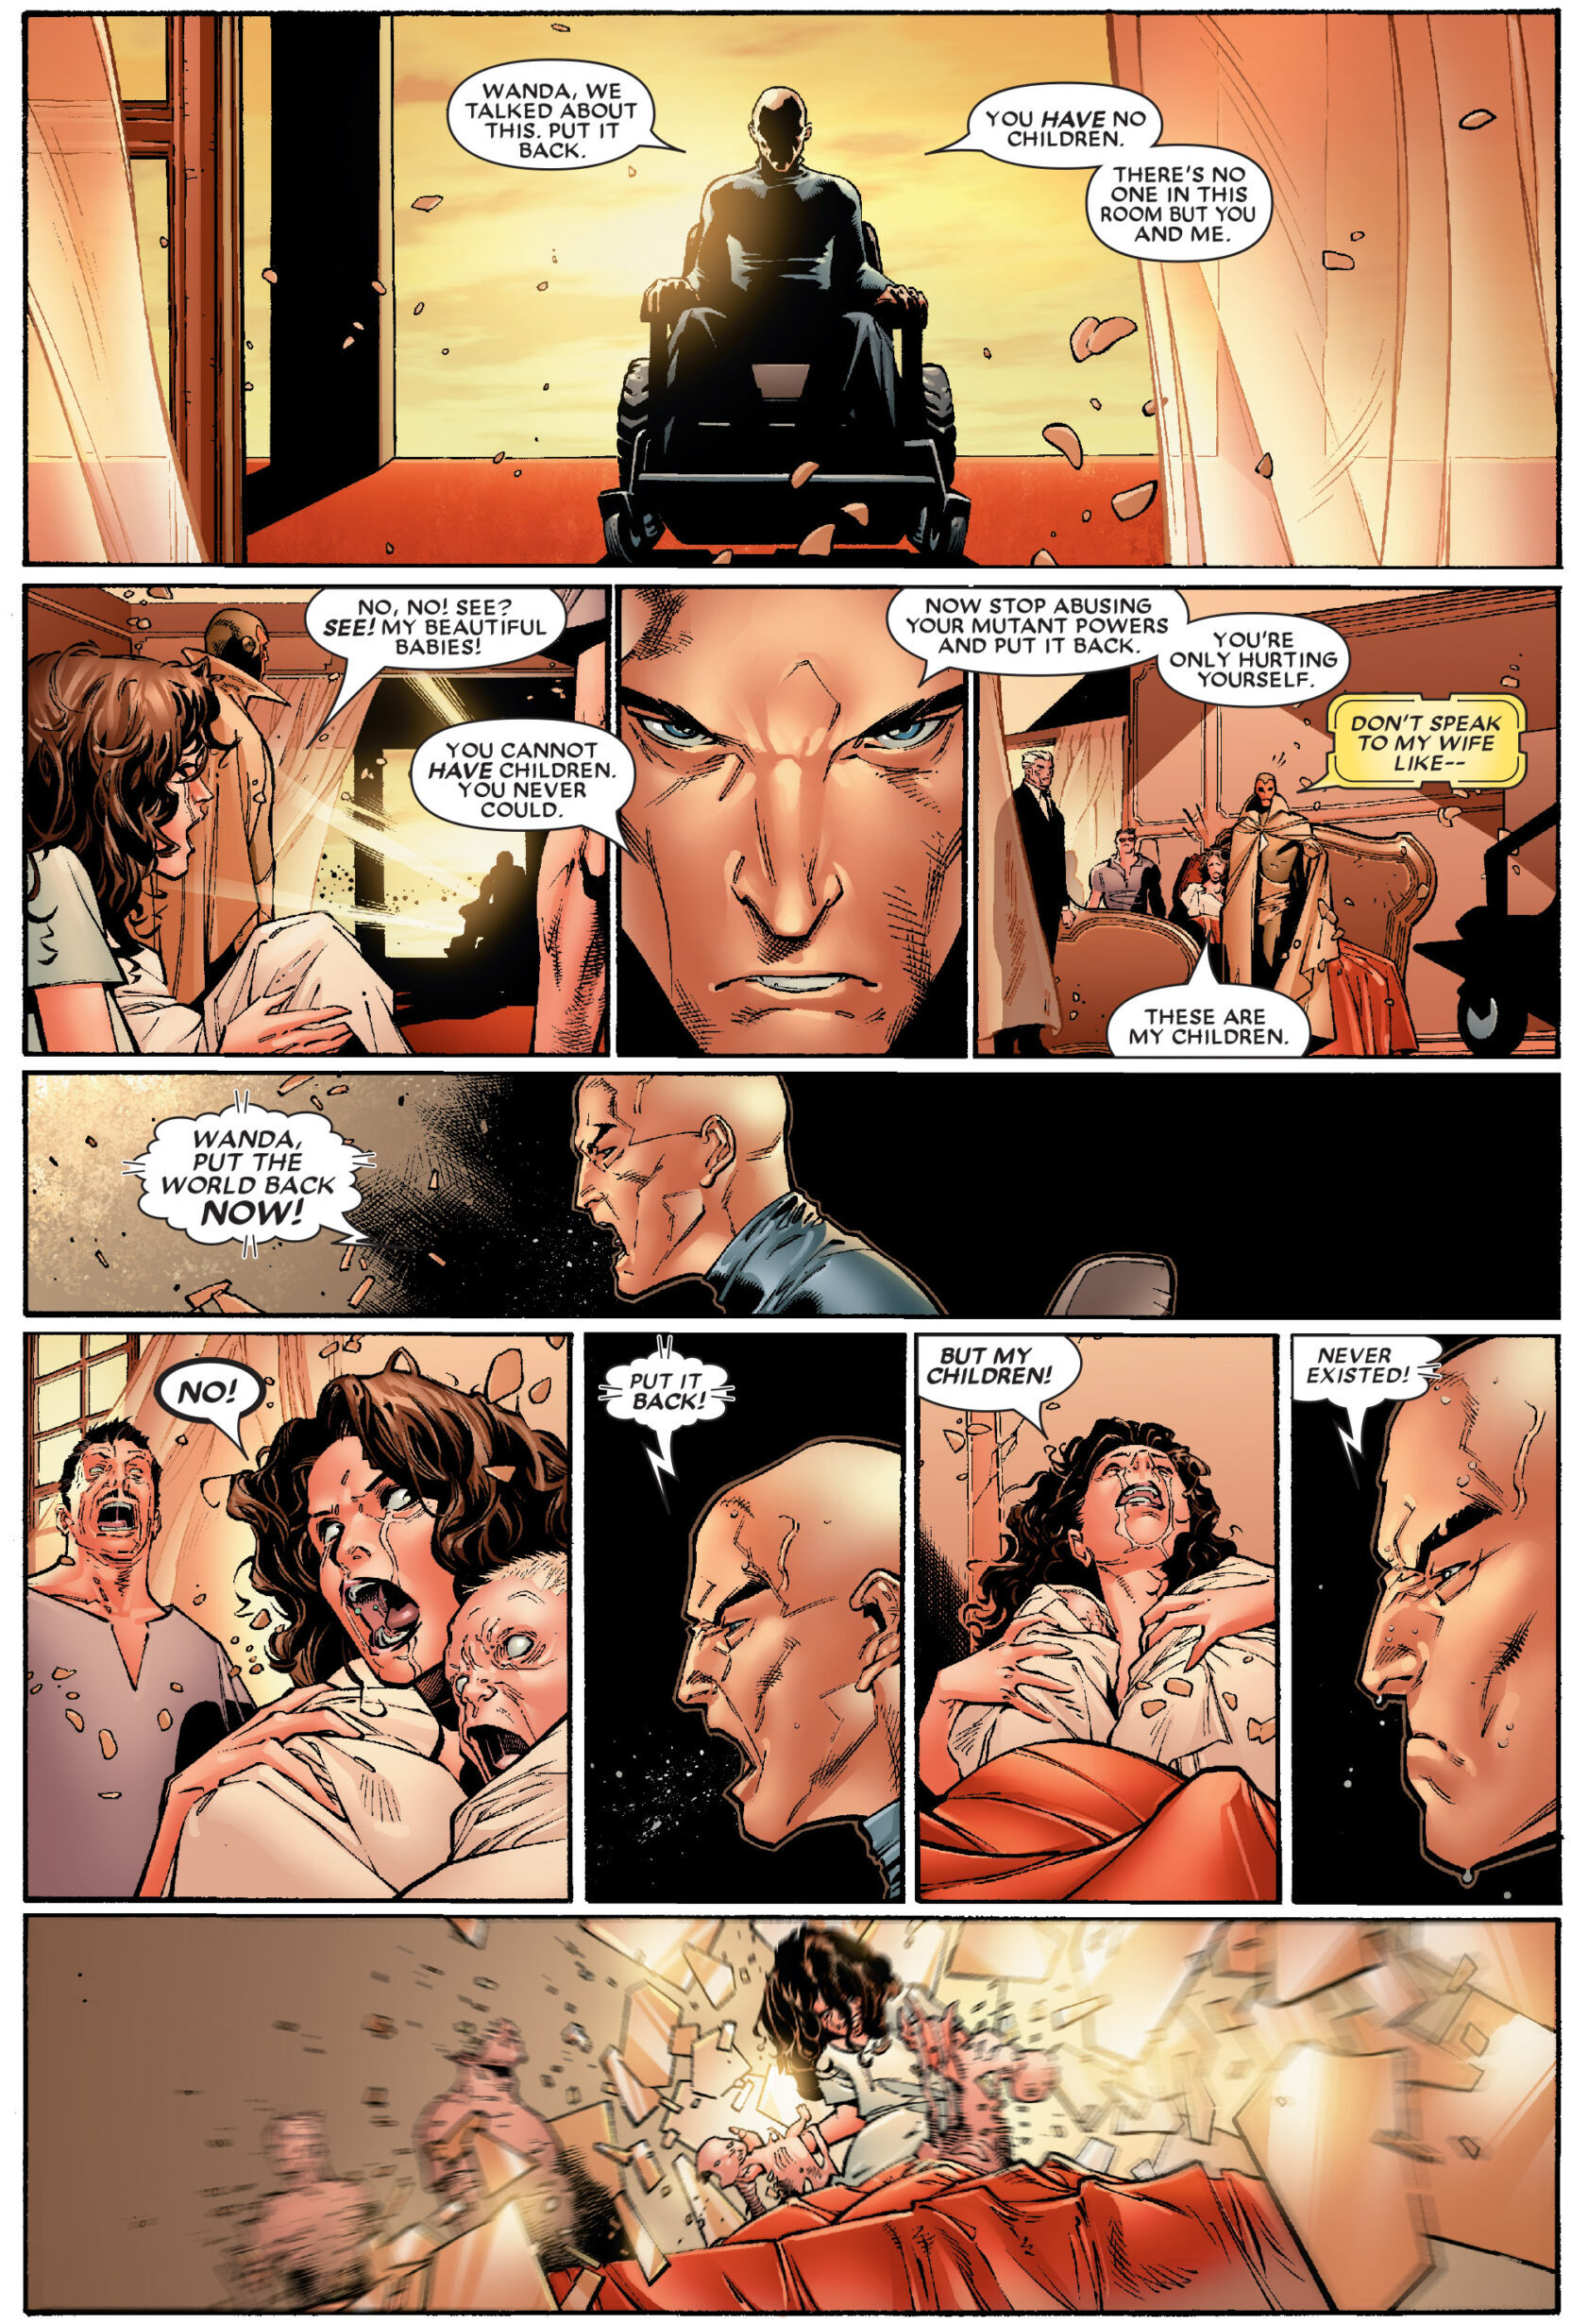 Professor X attempts to break through the Scarlet Witch's sense of denial in House of M Vol. 1 #1 (2005). Words by Brian Michael Bendis, art by Olivier Coipel, Tim Townsend, Frank D'Armata, and Chris Eliopoulos.